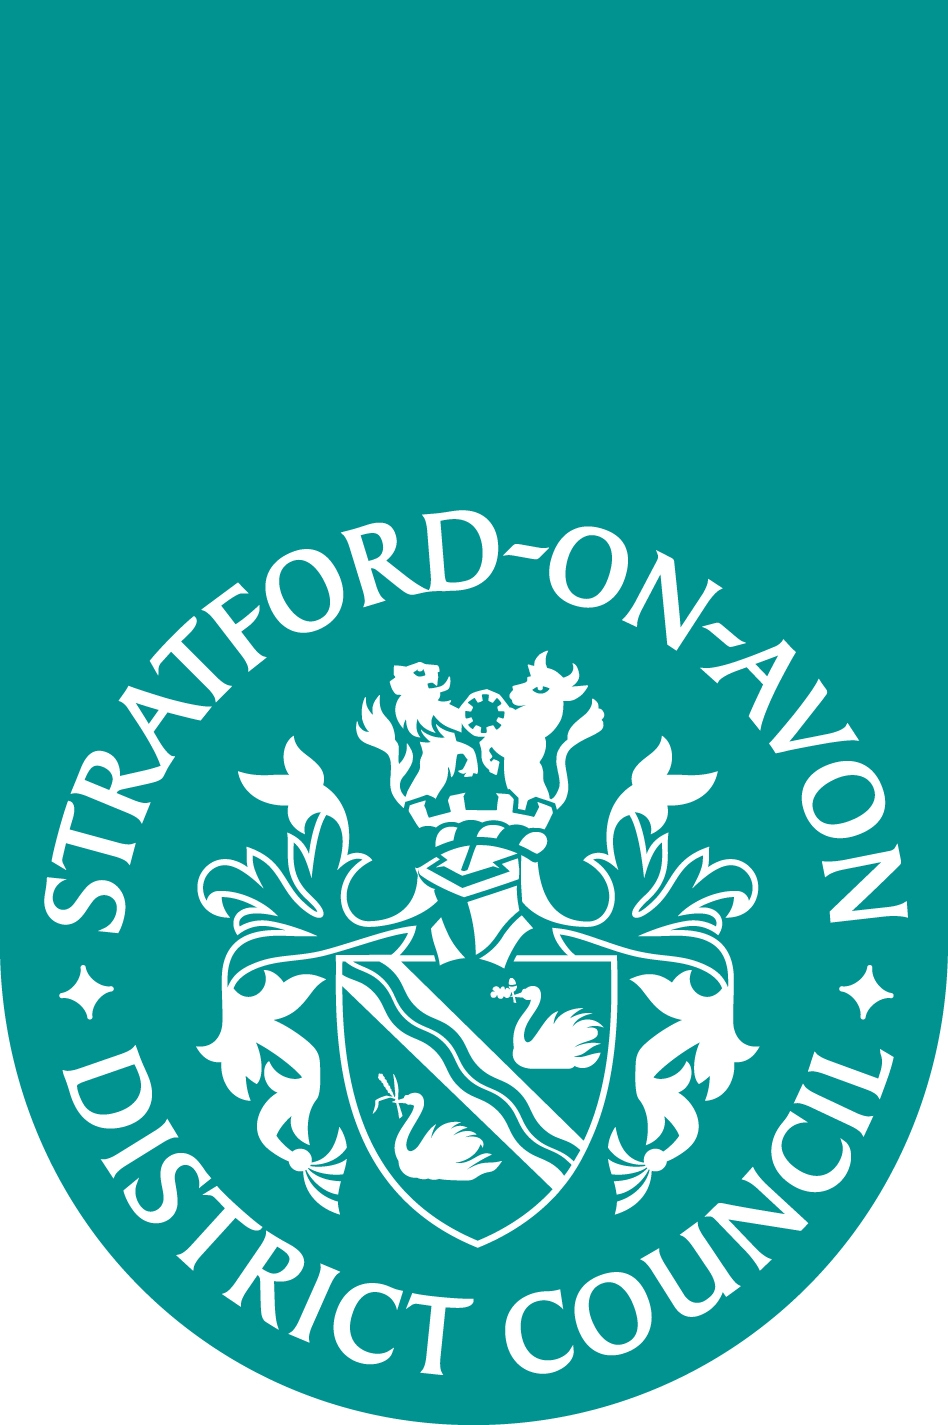 Stratford District Council - Have Your Say on the Council Plan!